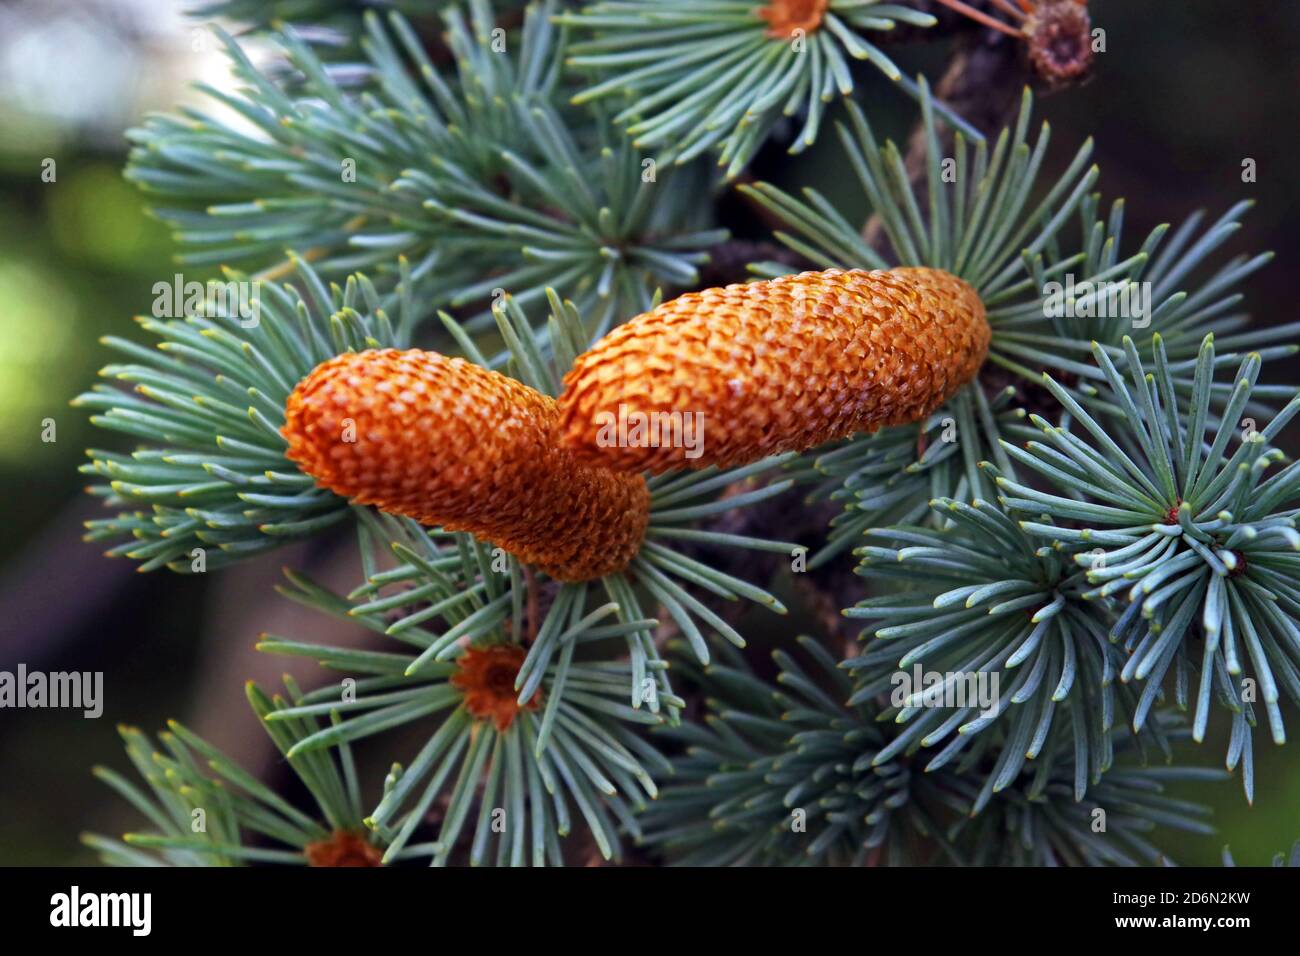 Fir-tree fruit close-up (picea pungens variety) Stock Photo